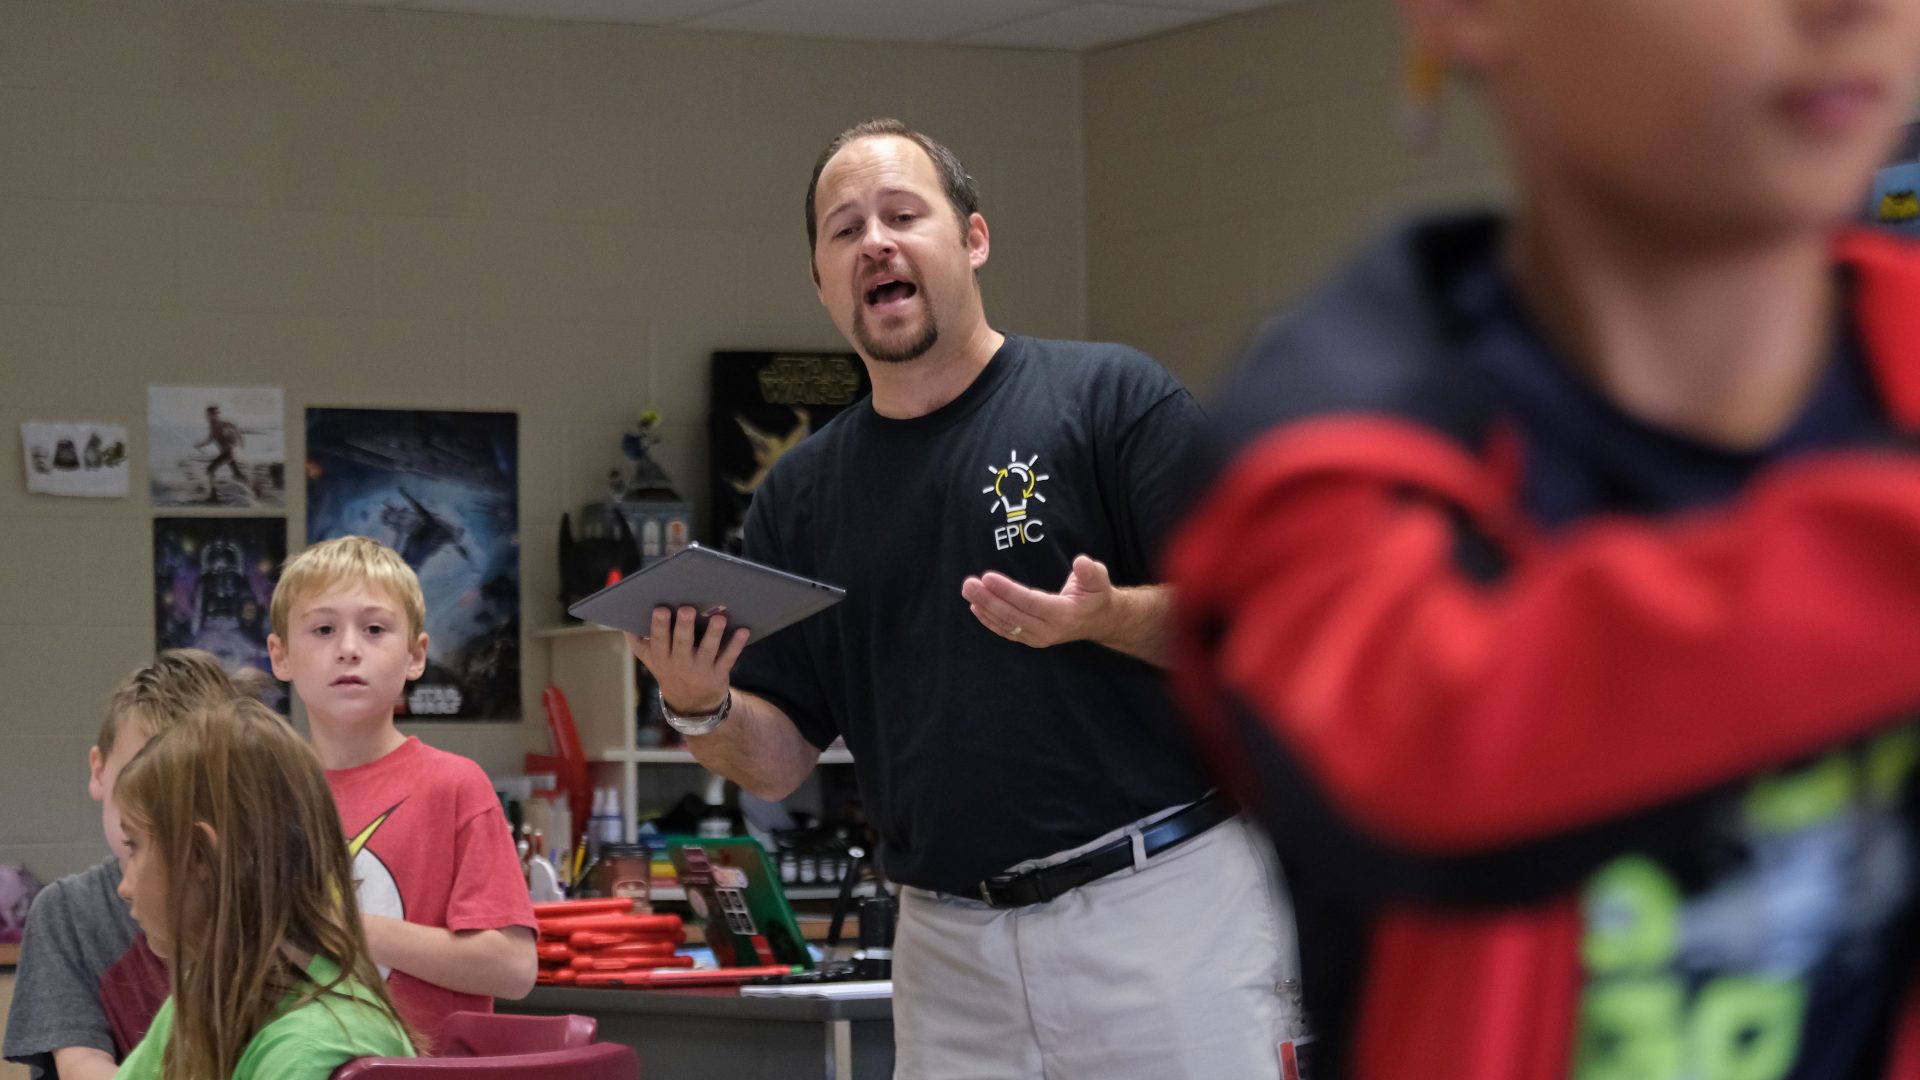 Discovery teacher Matt Derr instructs students as they work with a tornado simulation augmented reality program on smartphones Sept. 26, 2019, at Whitfield Elementary School in Spring Township, Berks County.